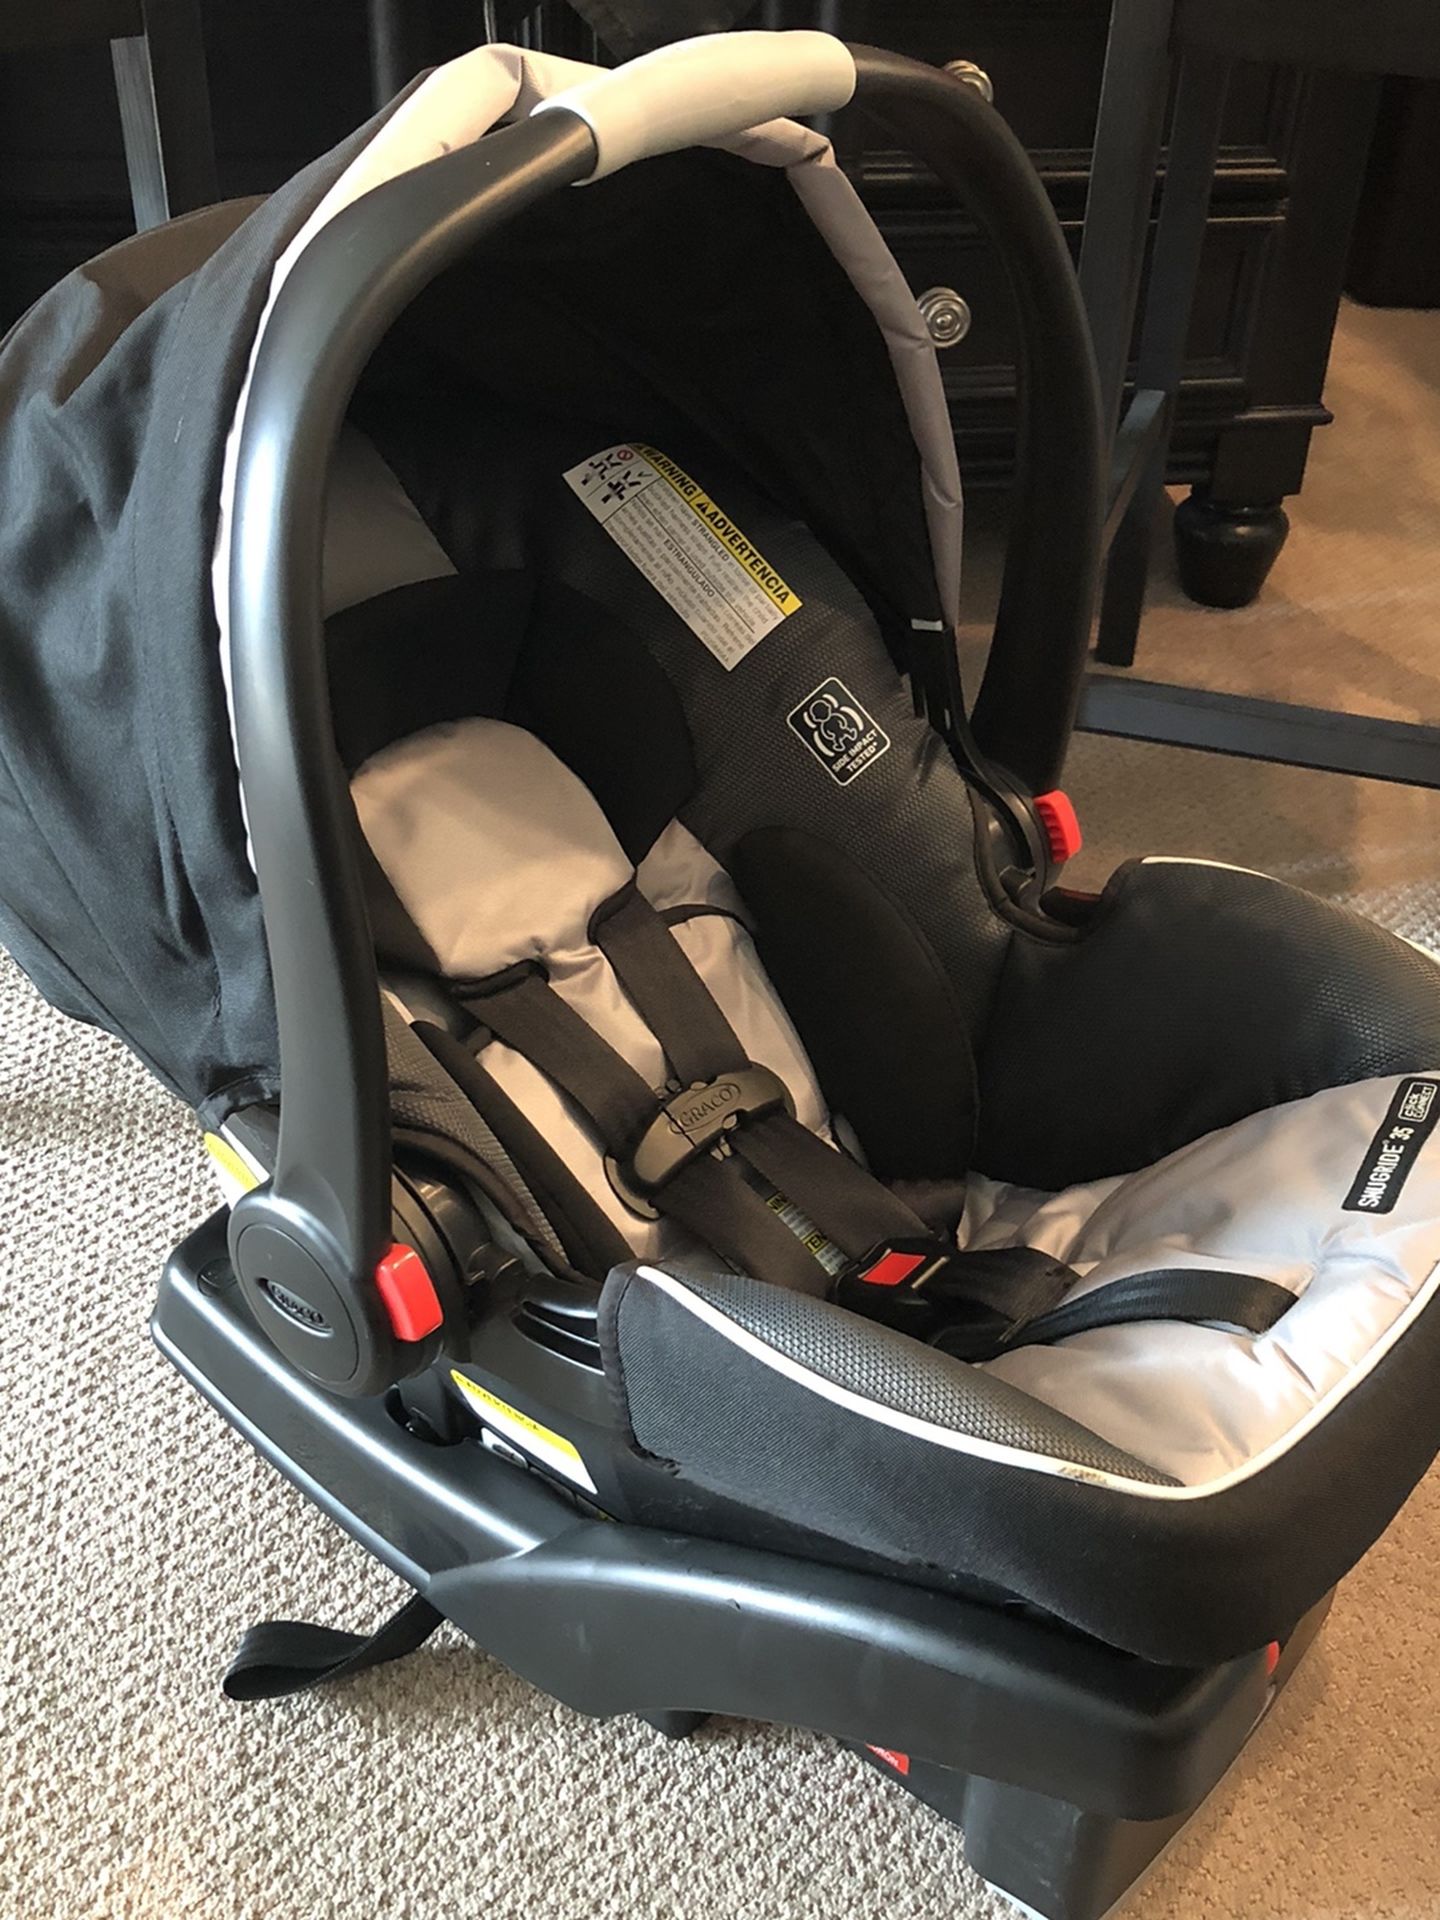 GRACO-Snugride 35-Click Connect-Infant Car Seat & Base-Like New!